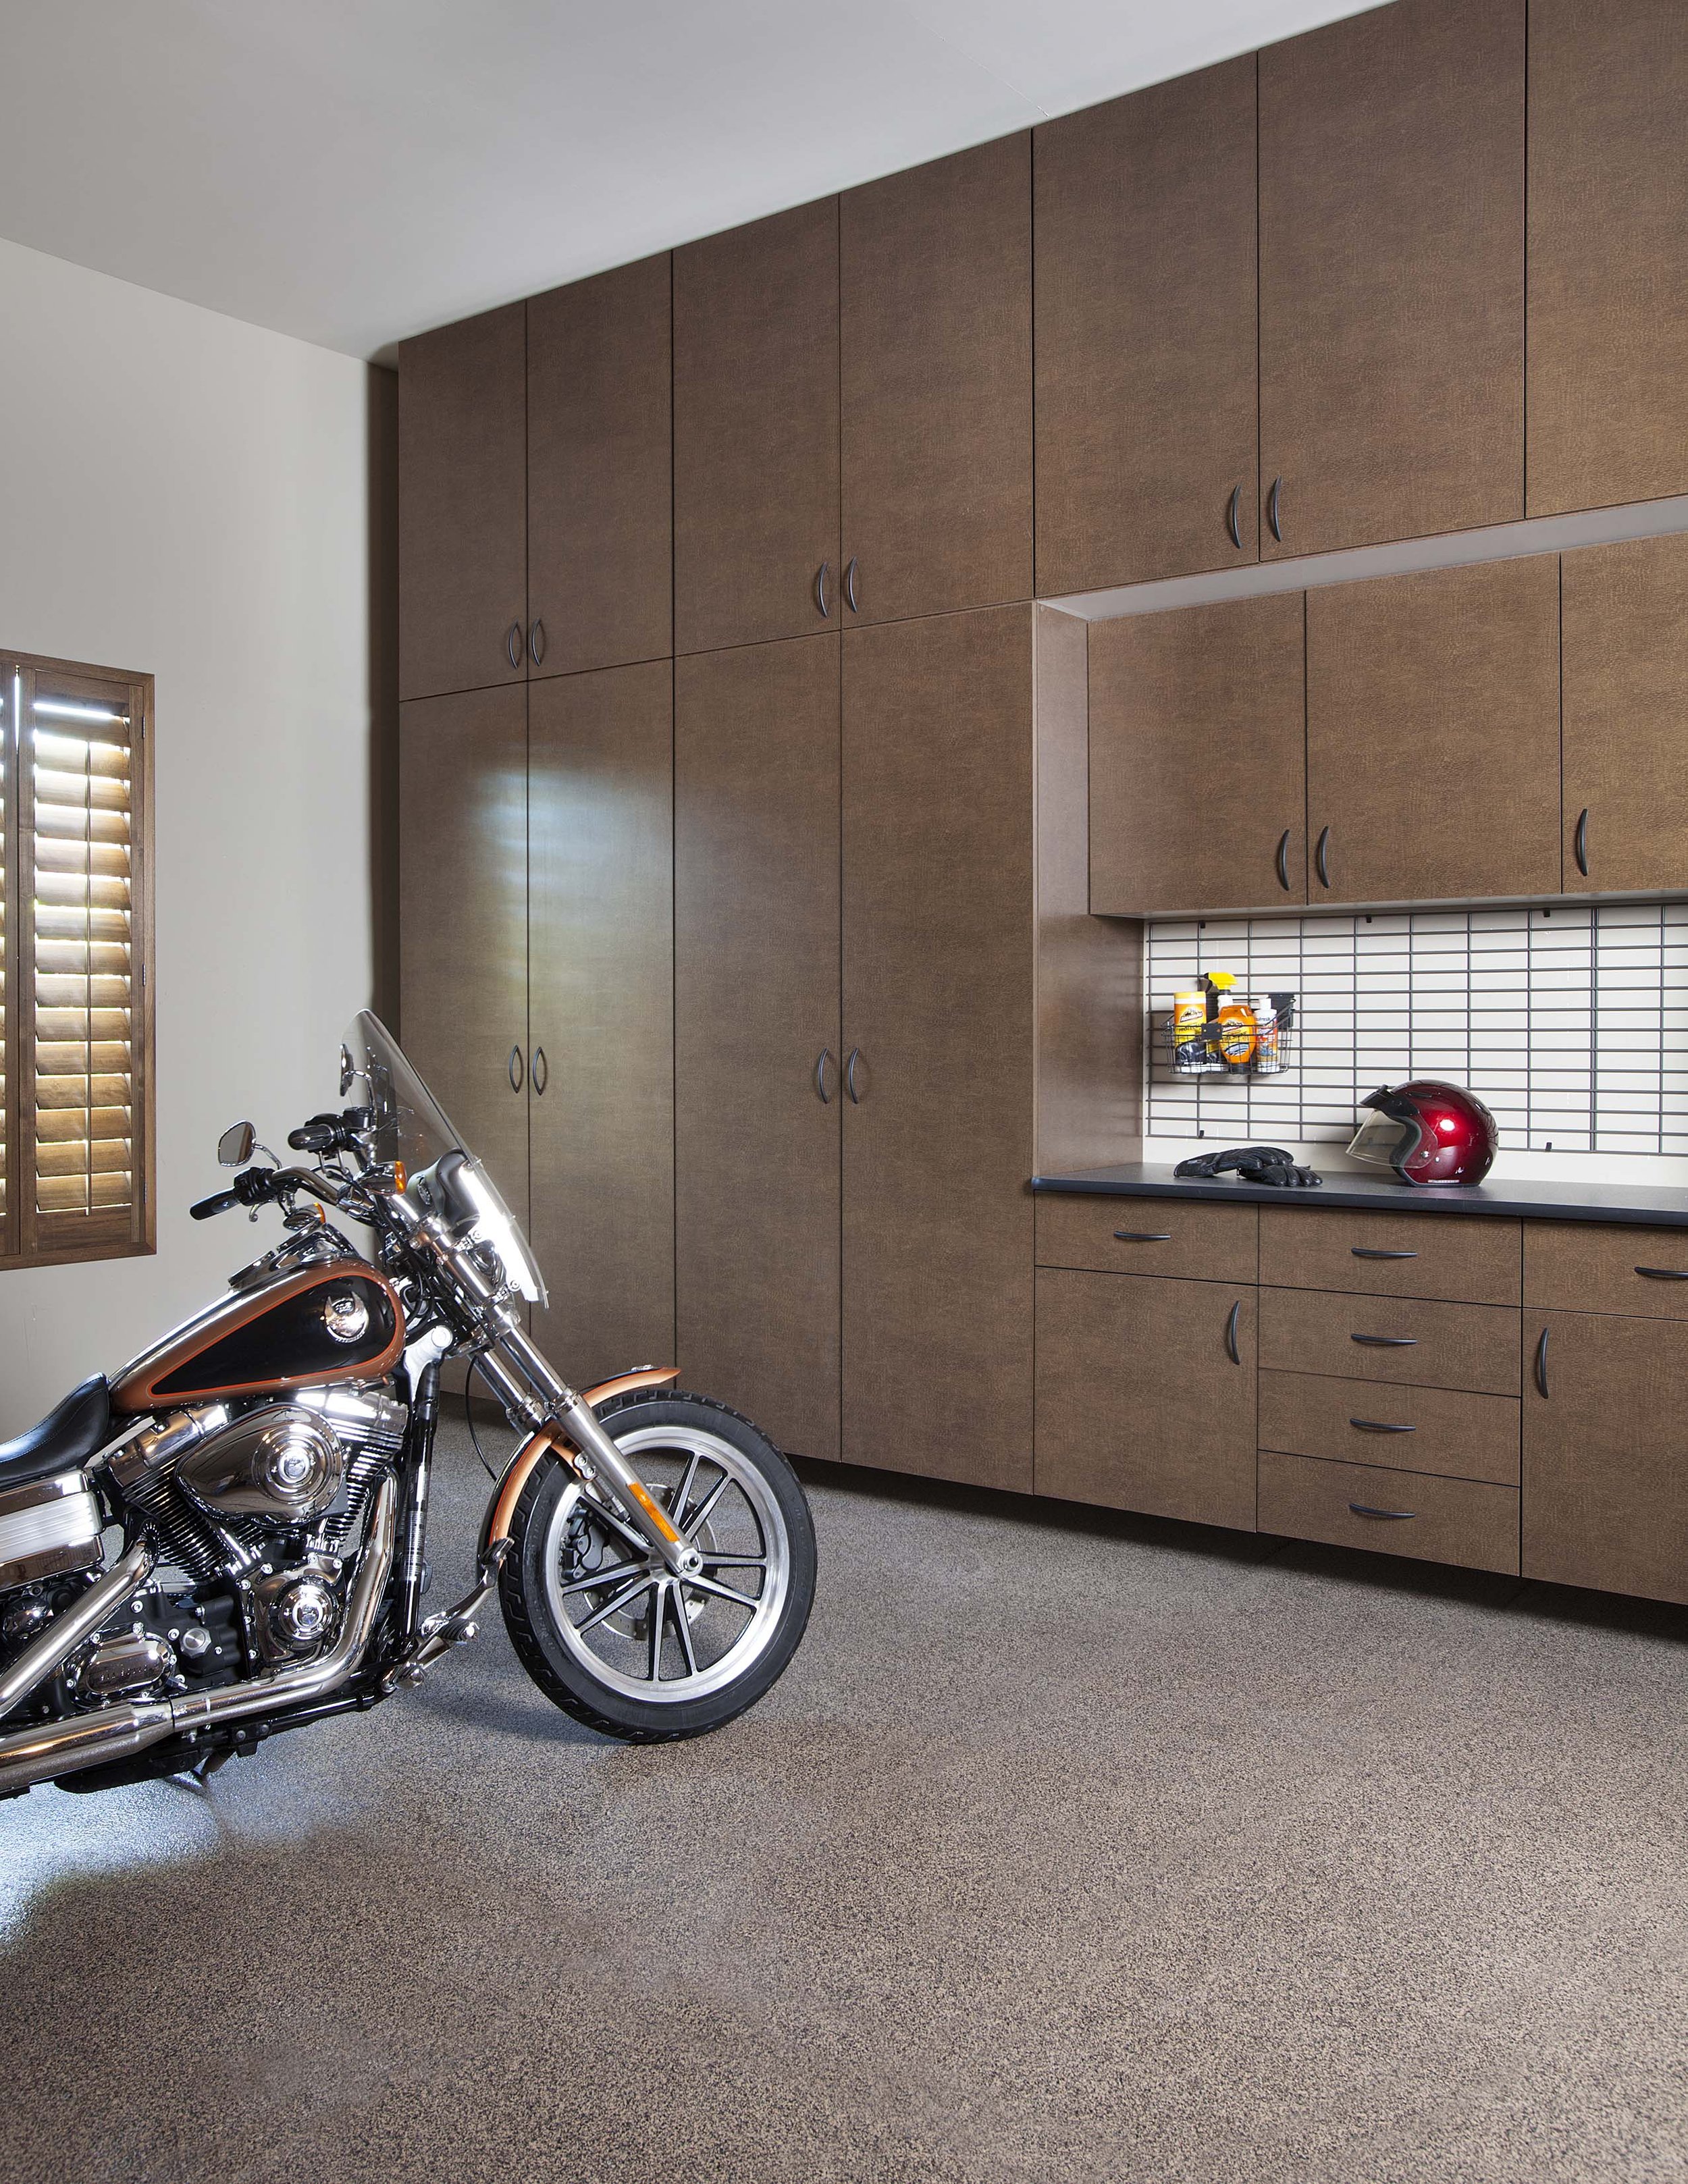 Bronze Extra Tall Cabinets-Inset Workbench-Motorcycle-Mojave Floor-Costa May 2013.jpg